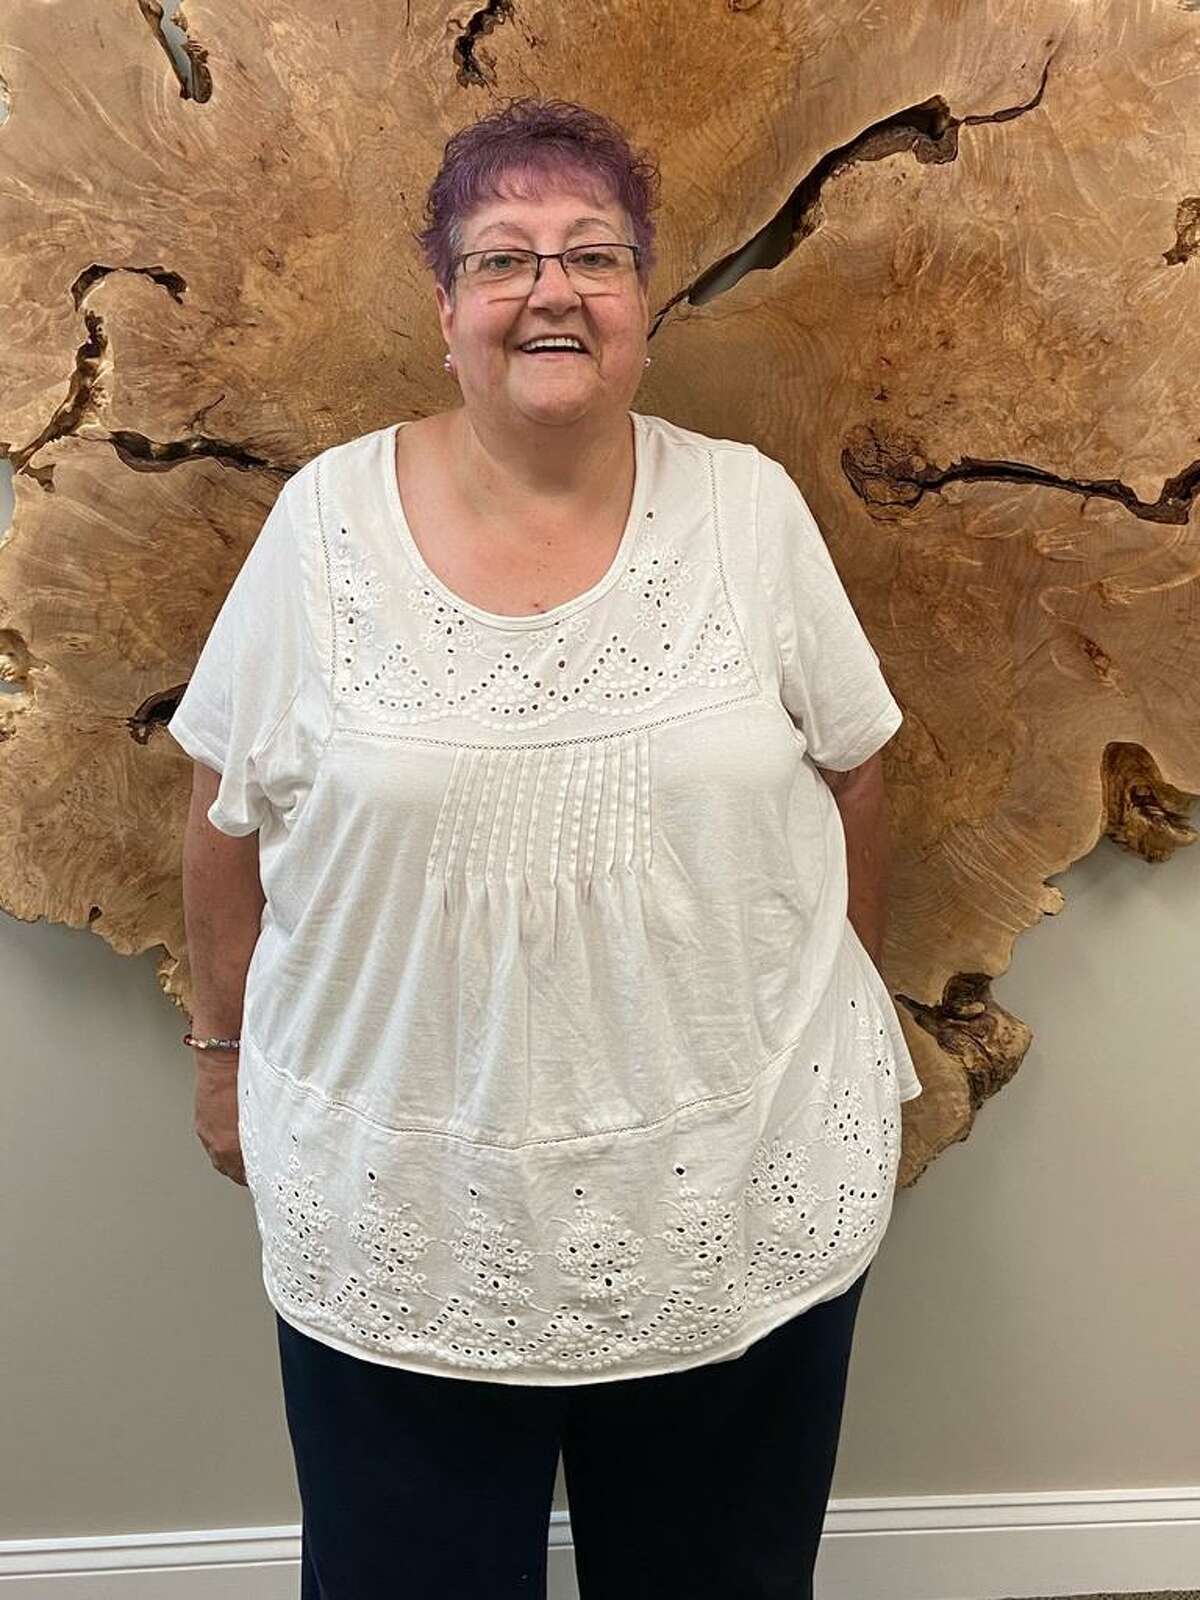 Following four hours of surgery, New Milford resident Concetta "Connie" Main walked out of Greater Connecticut Oral & Dental Implant Surgery's Danbury office with a brand new smile, courtesy of the Second Chance program.